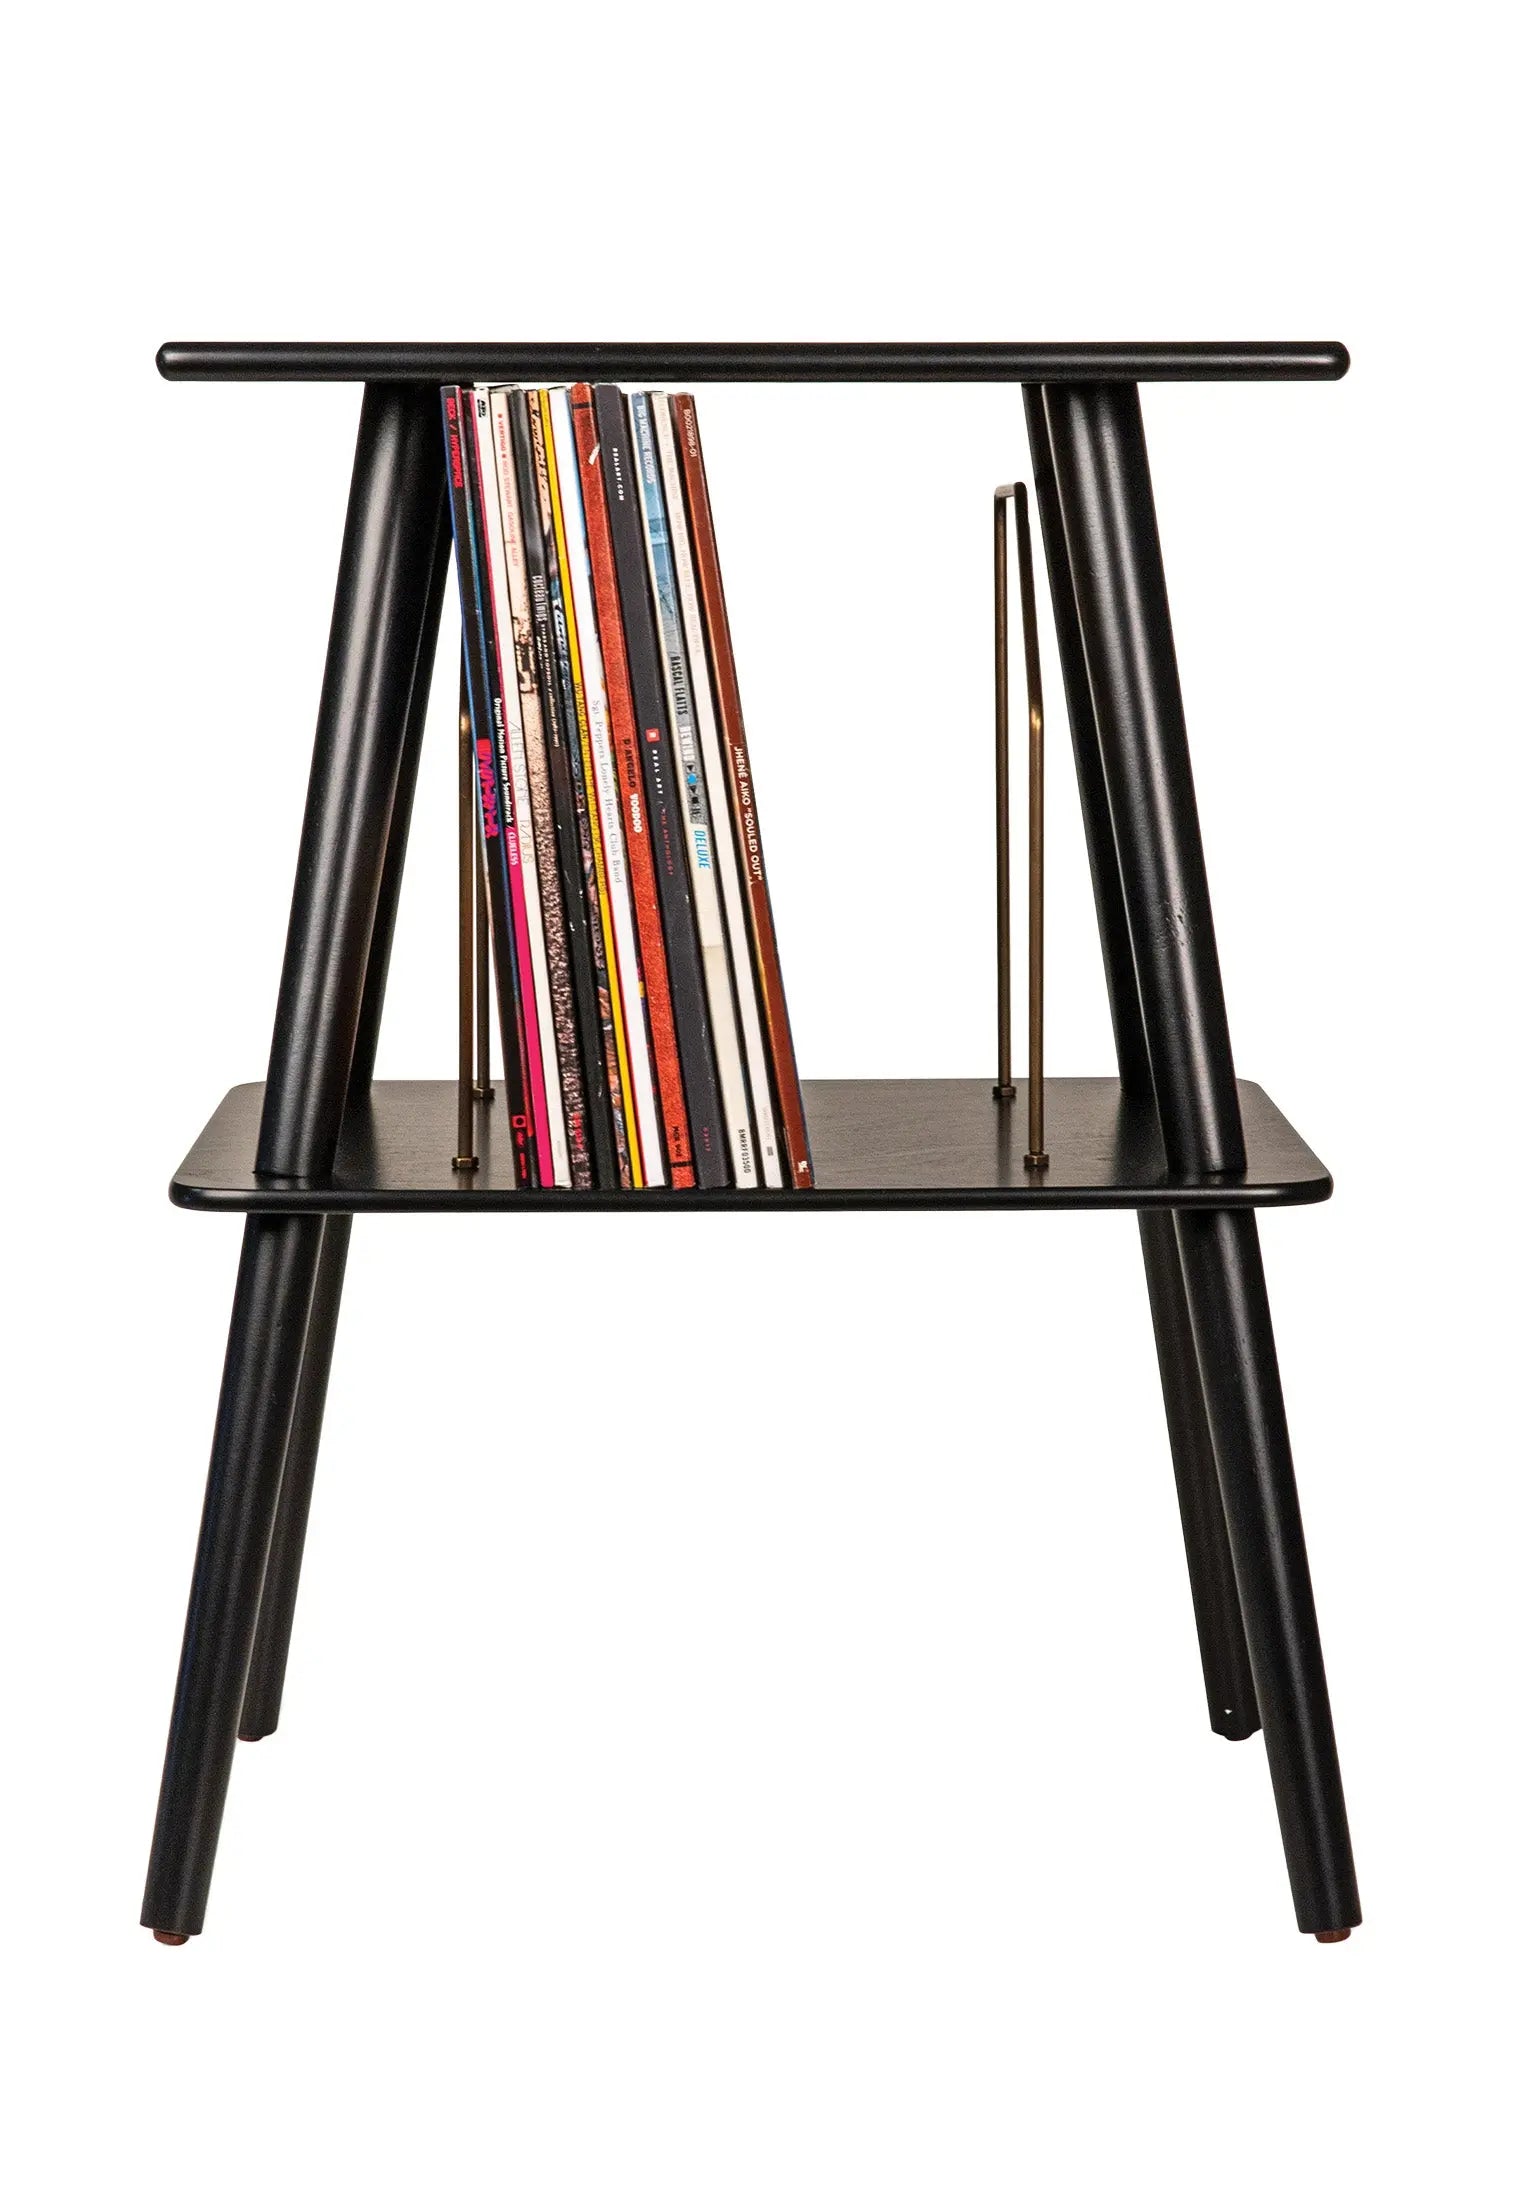 Manchester record player stand with storage furniture - ST66-BK | Black Crosley Radio Europe